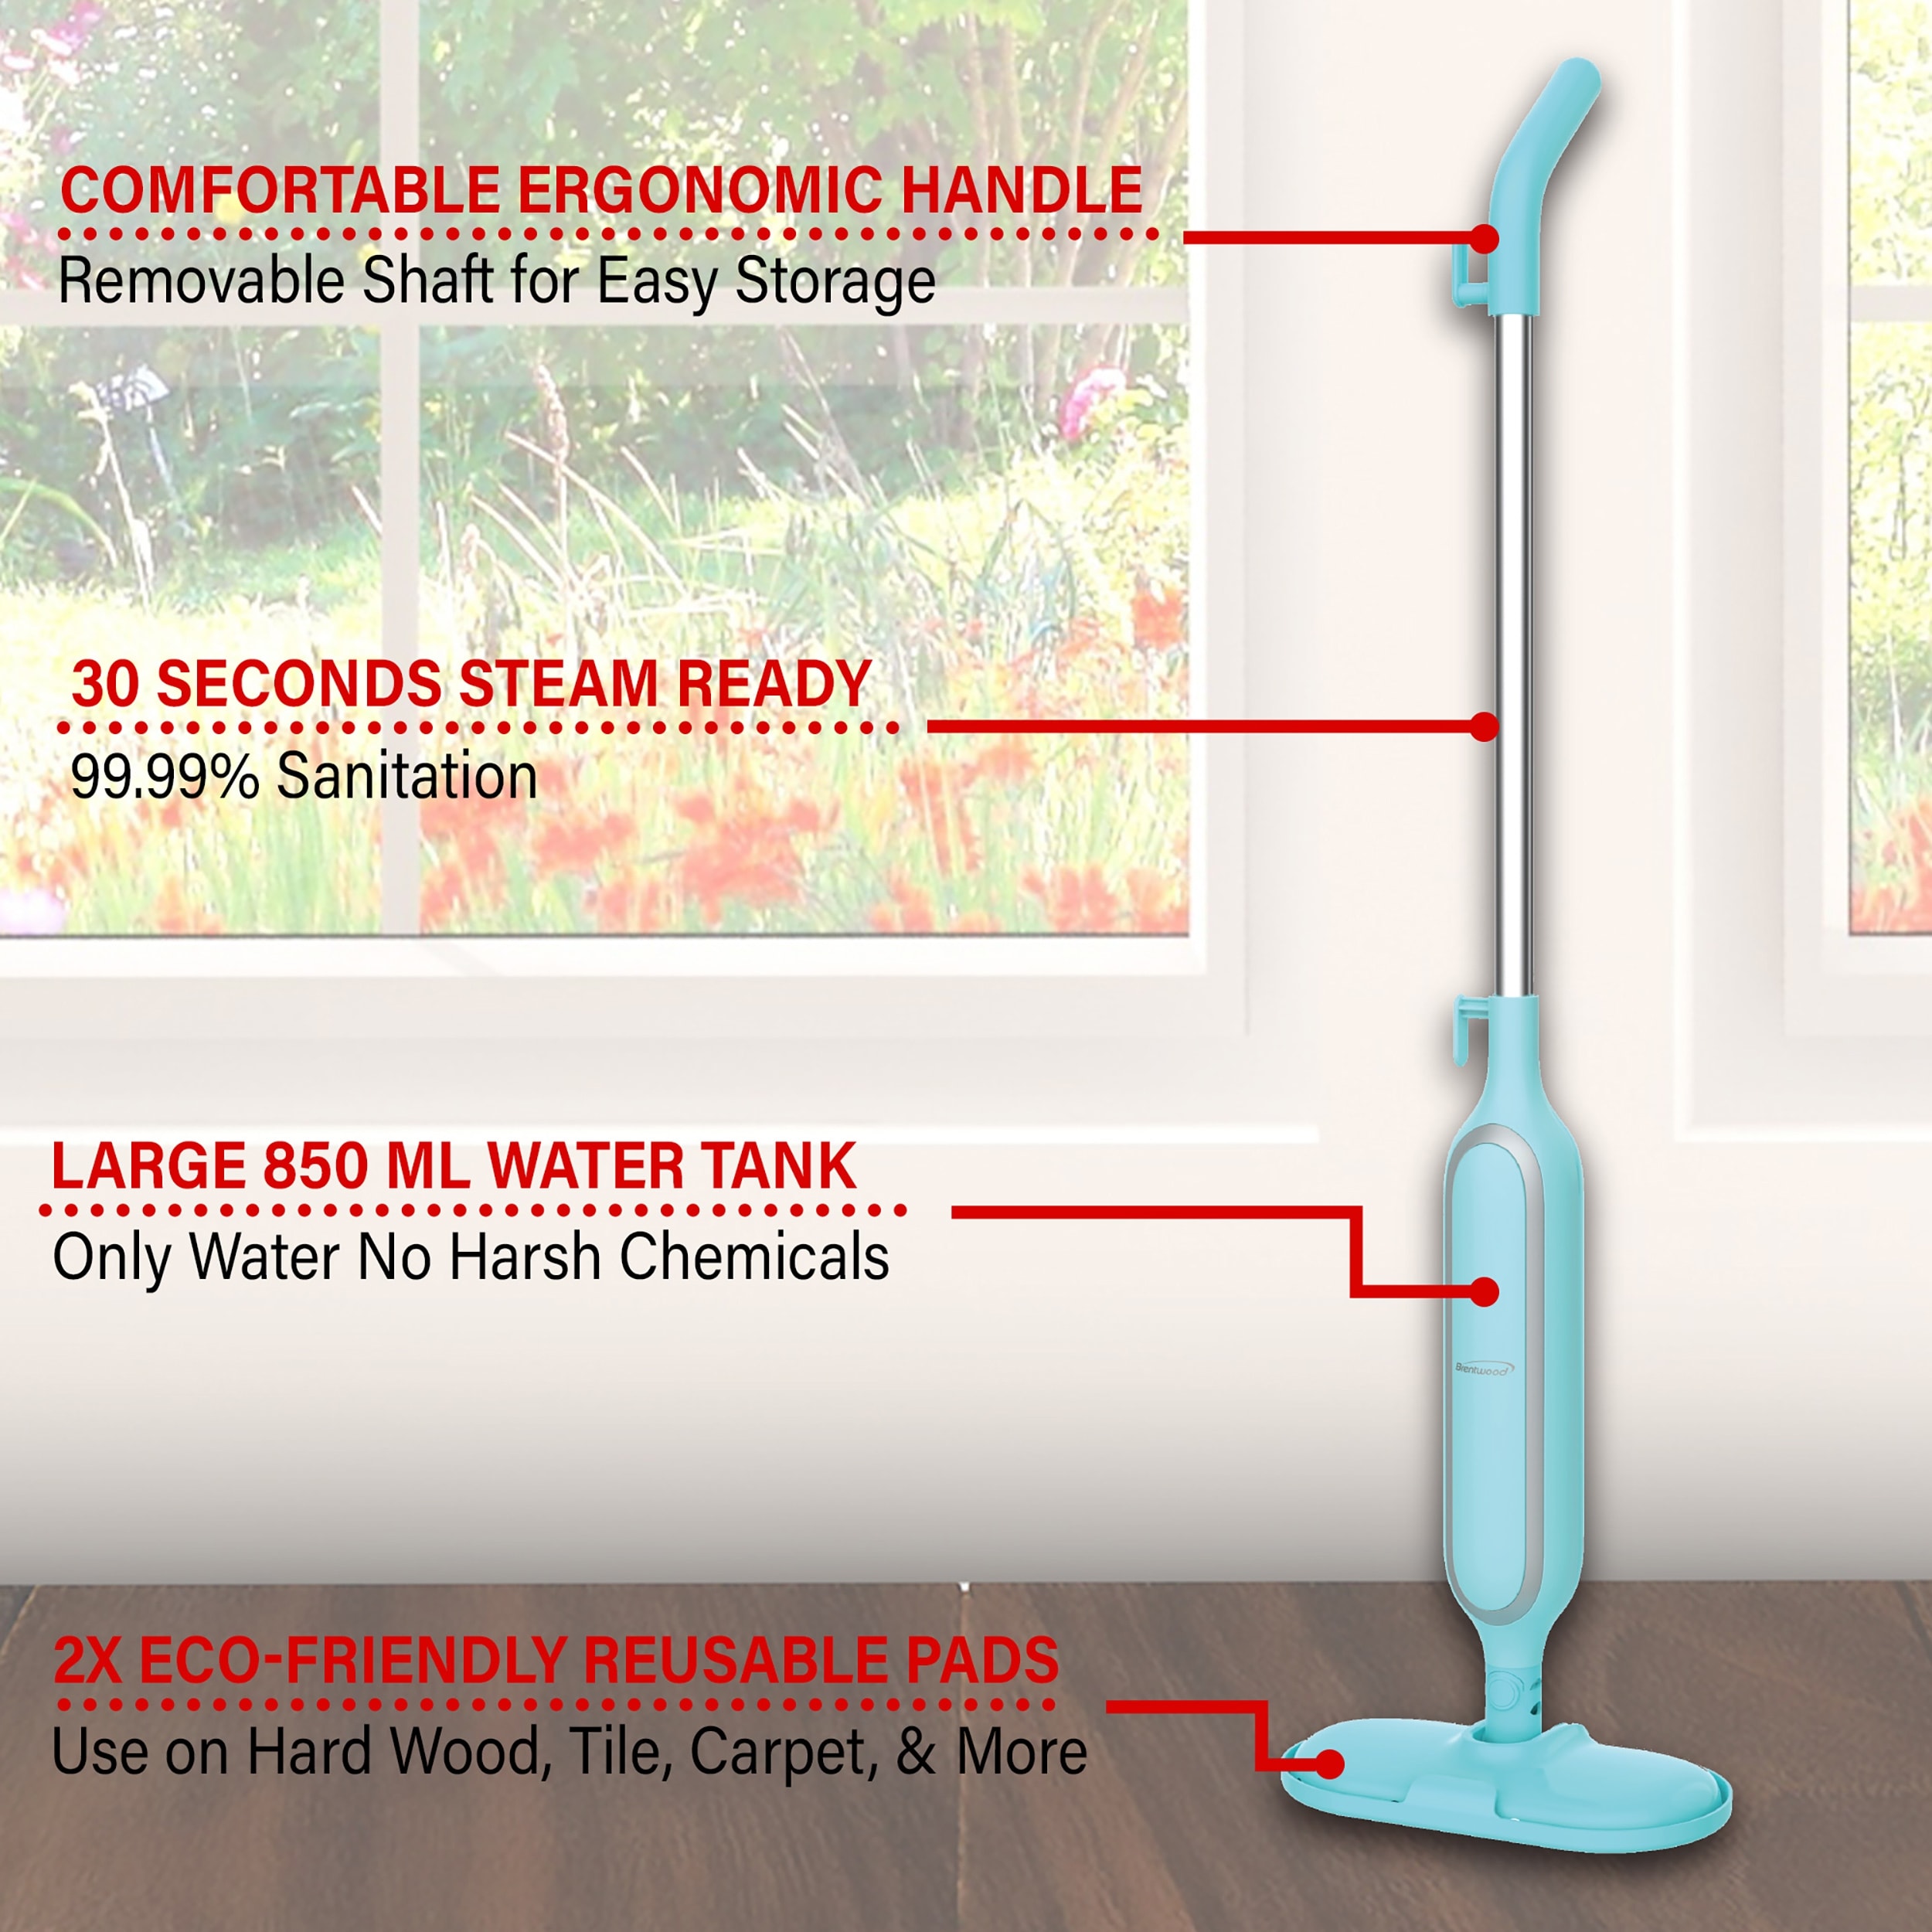 https://ak1.ostkcdn.com/images/products/is/images/direct/30ae85377e87ec825cb9d685fd8e3697ed9071e0/Brentwood-1100w-Steamer-Mop-in-Blue.jpg